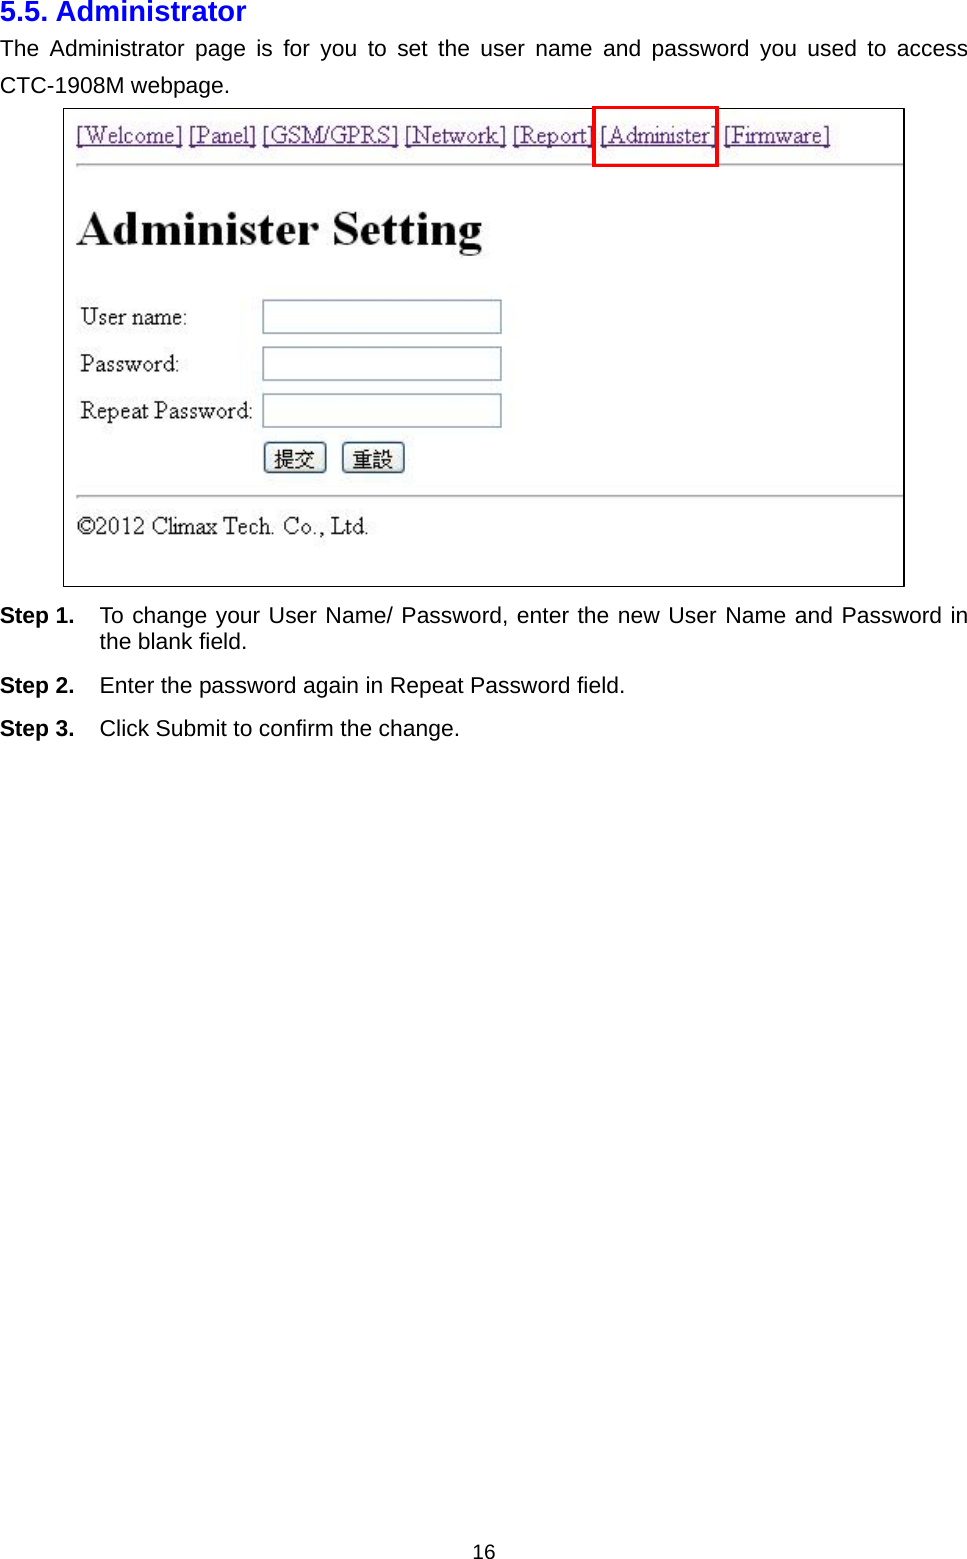  165.5. Administrator The Administrator page is for you to set the user name and password you used to access CTC-1908M webpage.           Step 1.  To change your User Name/ Password, enter the new User Name and Password in the blank field. Step 2.  Enter the password again in Repeat Password field. Step 3.  Click Submit to confirm the change.                